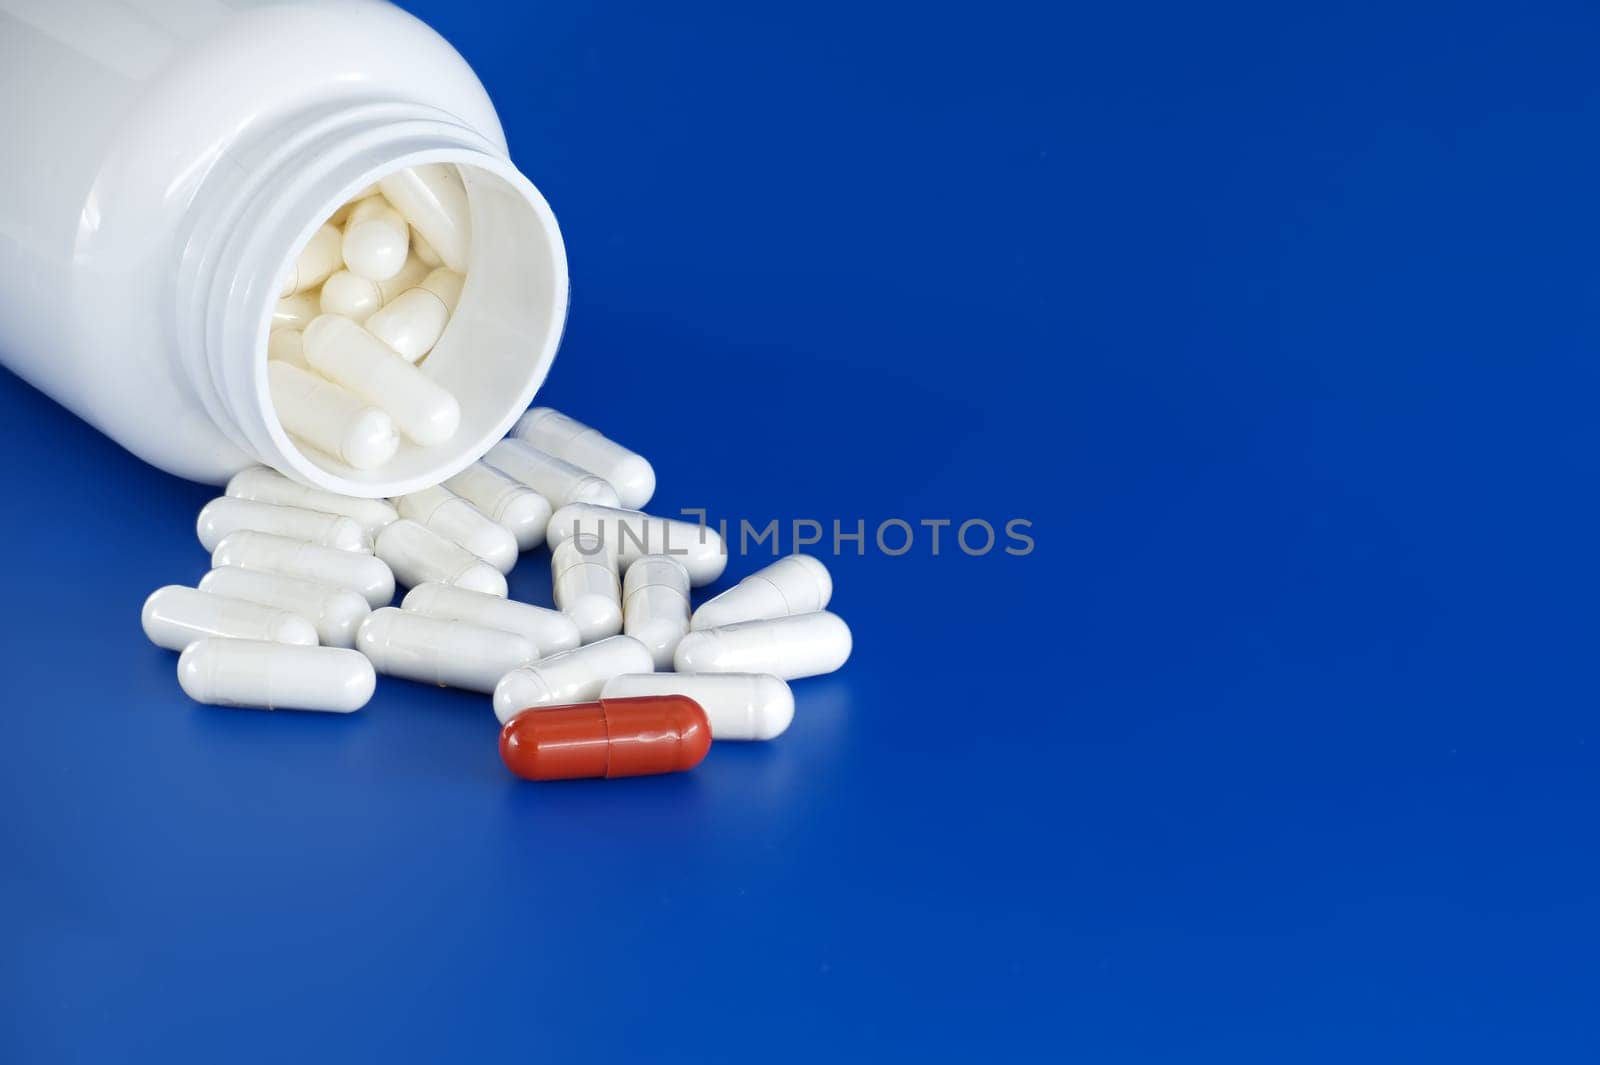 Overturned white medicine bottle with its contents white pills or capsules, spilled out onto a blue background. Among these white pills, a solitary red pill stands out